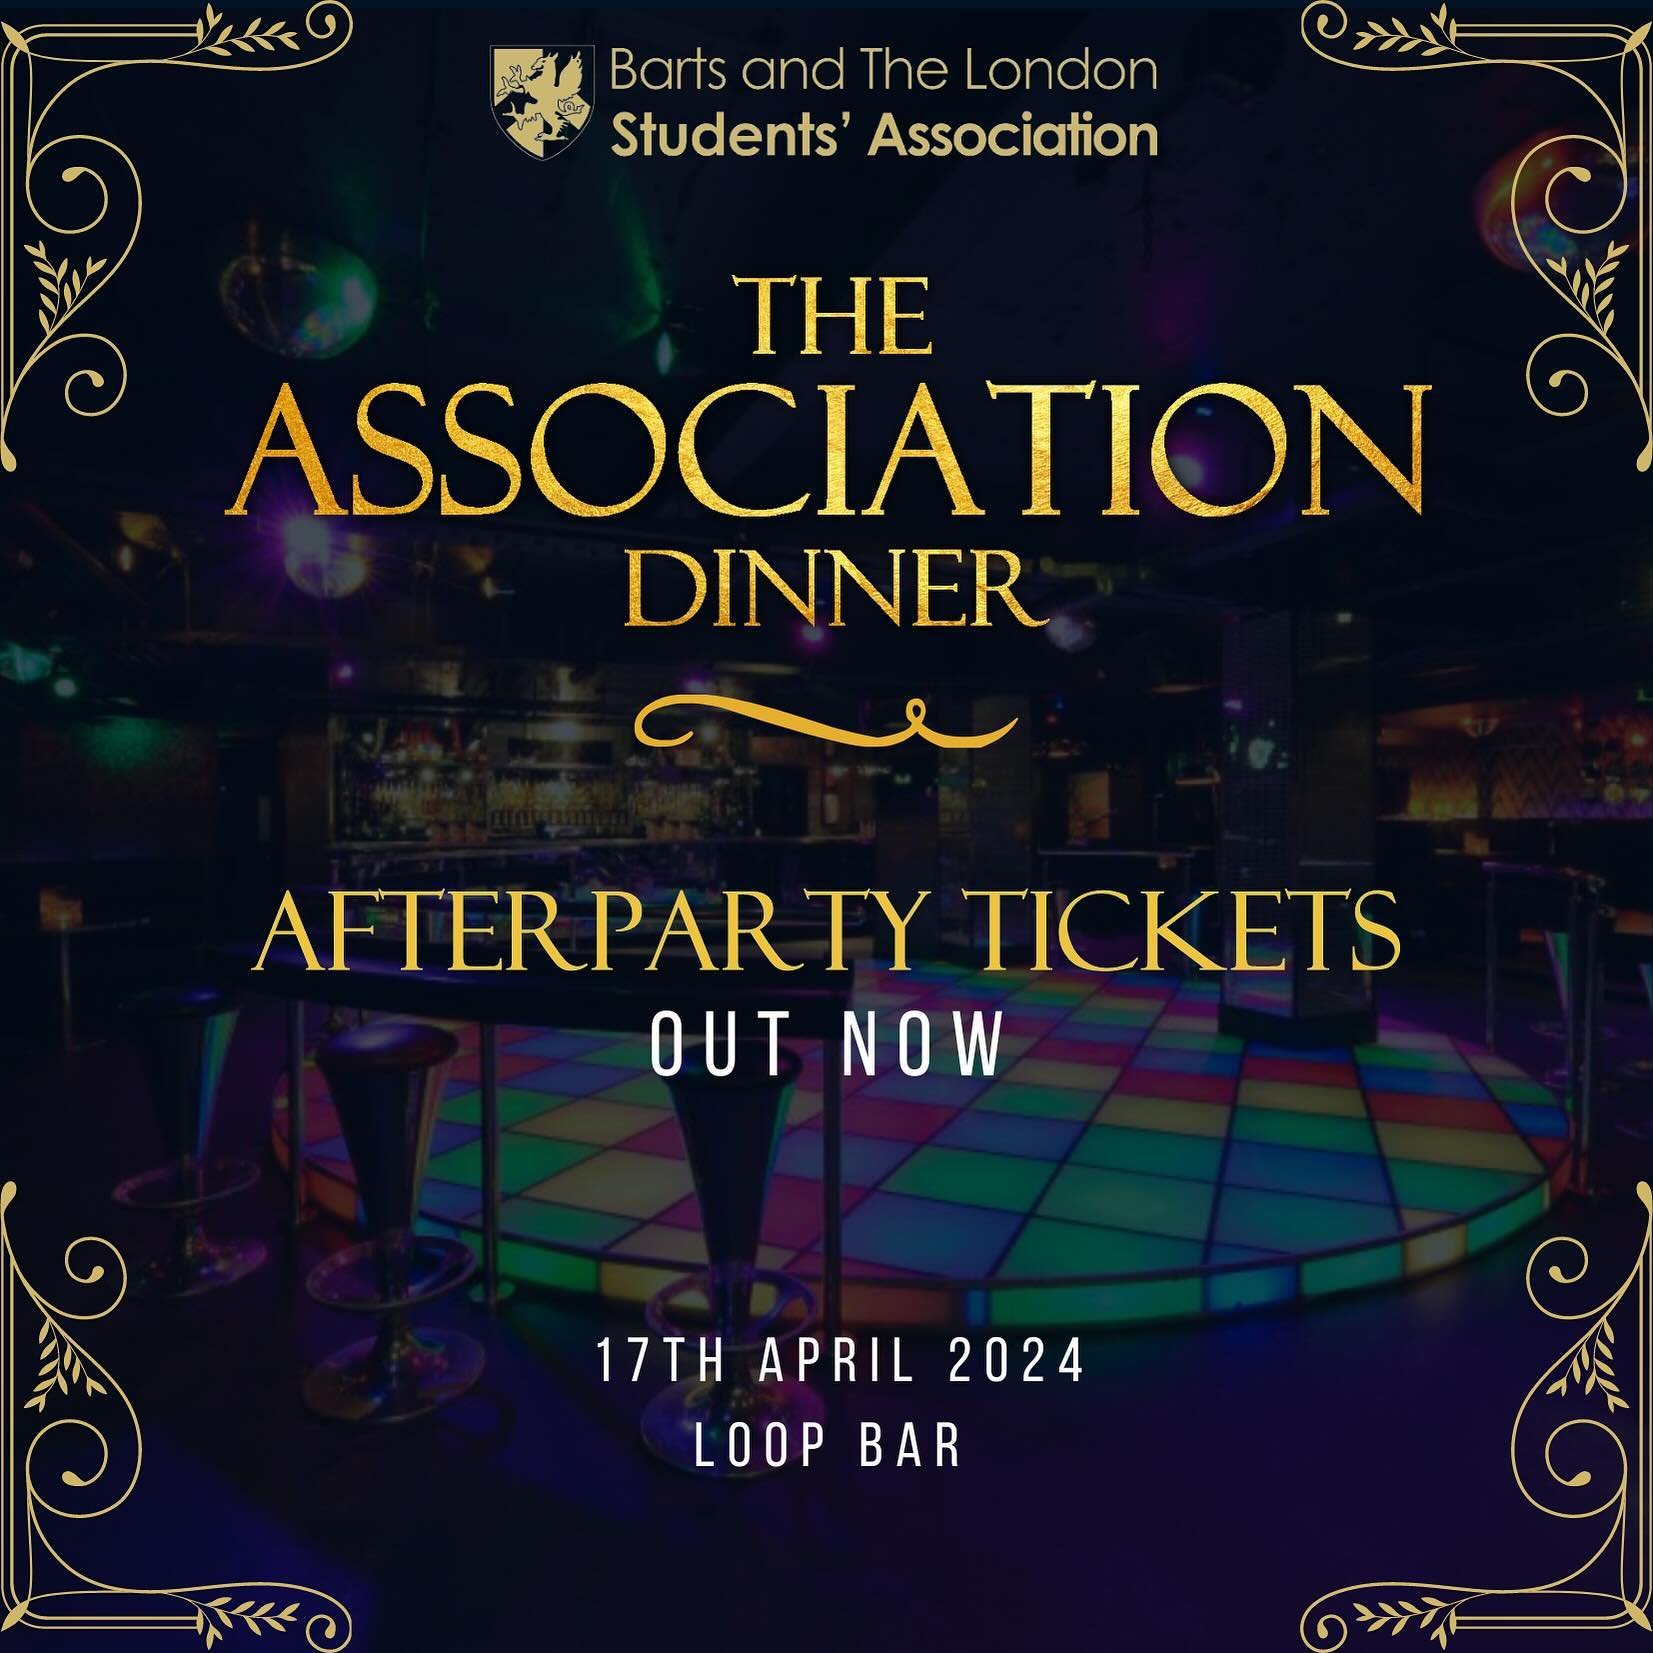 🚨 ASSOC AFTERPARTY ALERT 🚨

As if the lavish affair that is the Association Dinner couldn&rsquo;t get any more decadent, come join us in the heart of Mayfair for an exclusive Afterparty at the Loop Bar!

The BLSA have exclusive access to an entire 